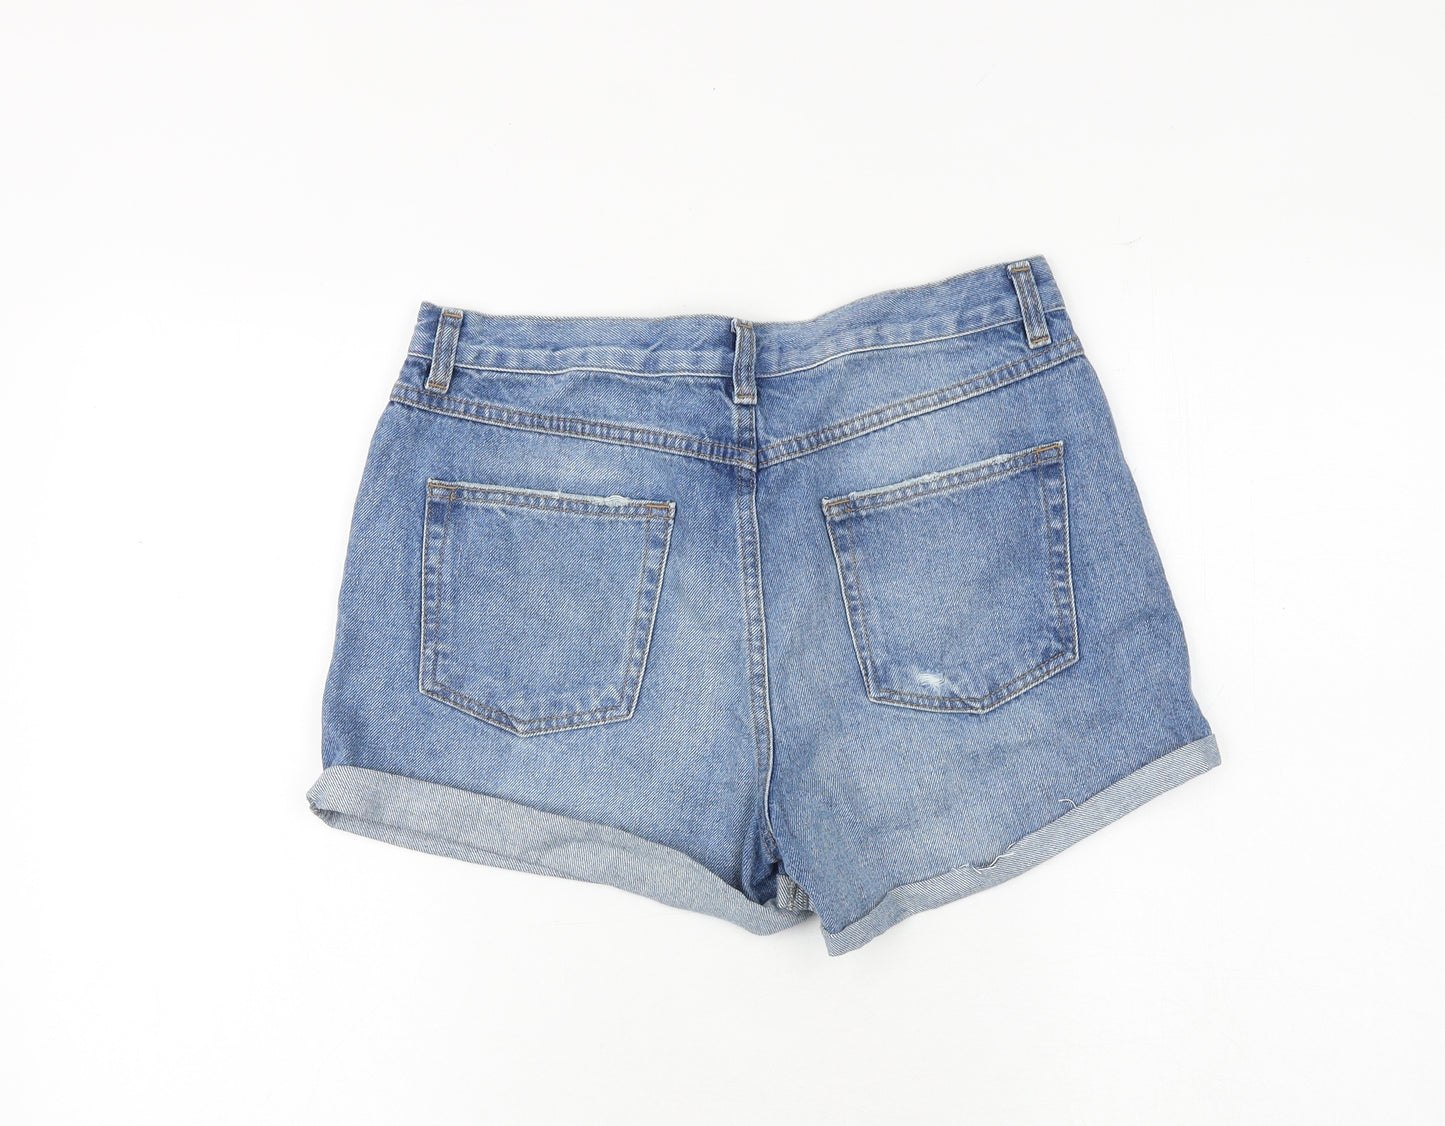 Topshop Womens Blue 100% Cotton Mom Shorts Size 12 Regular Zip - Distressed Look